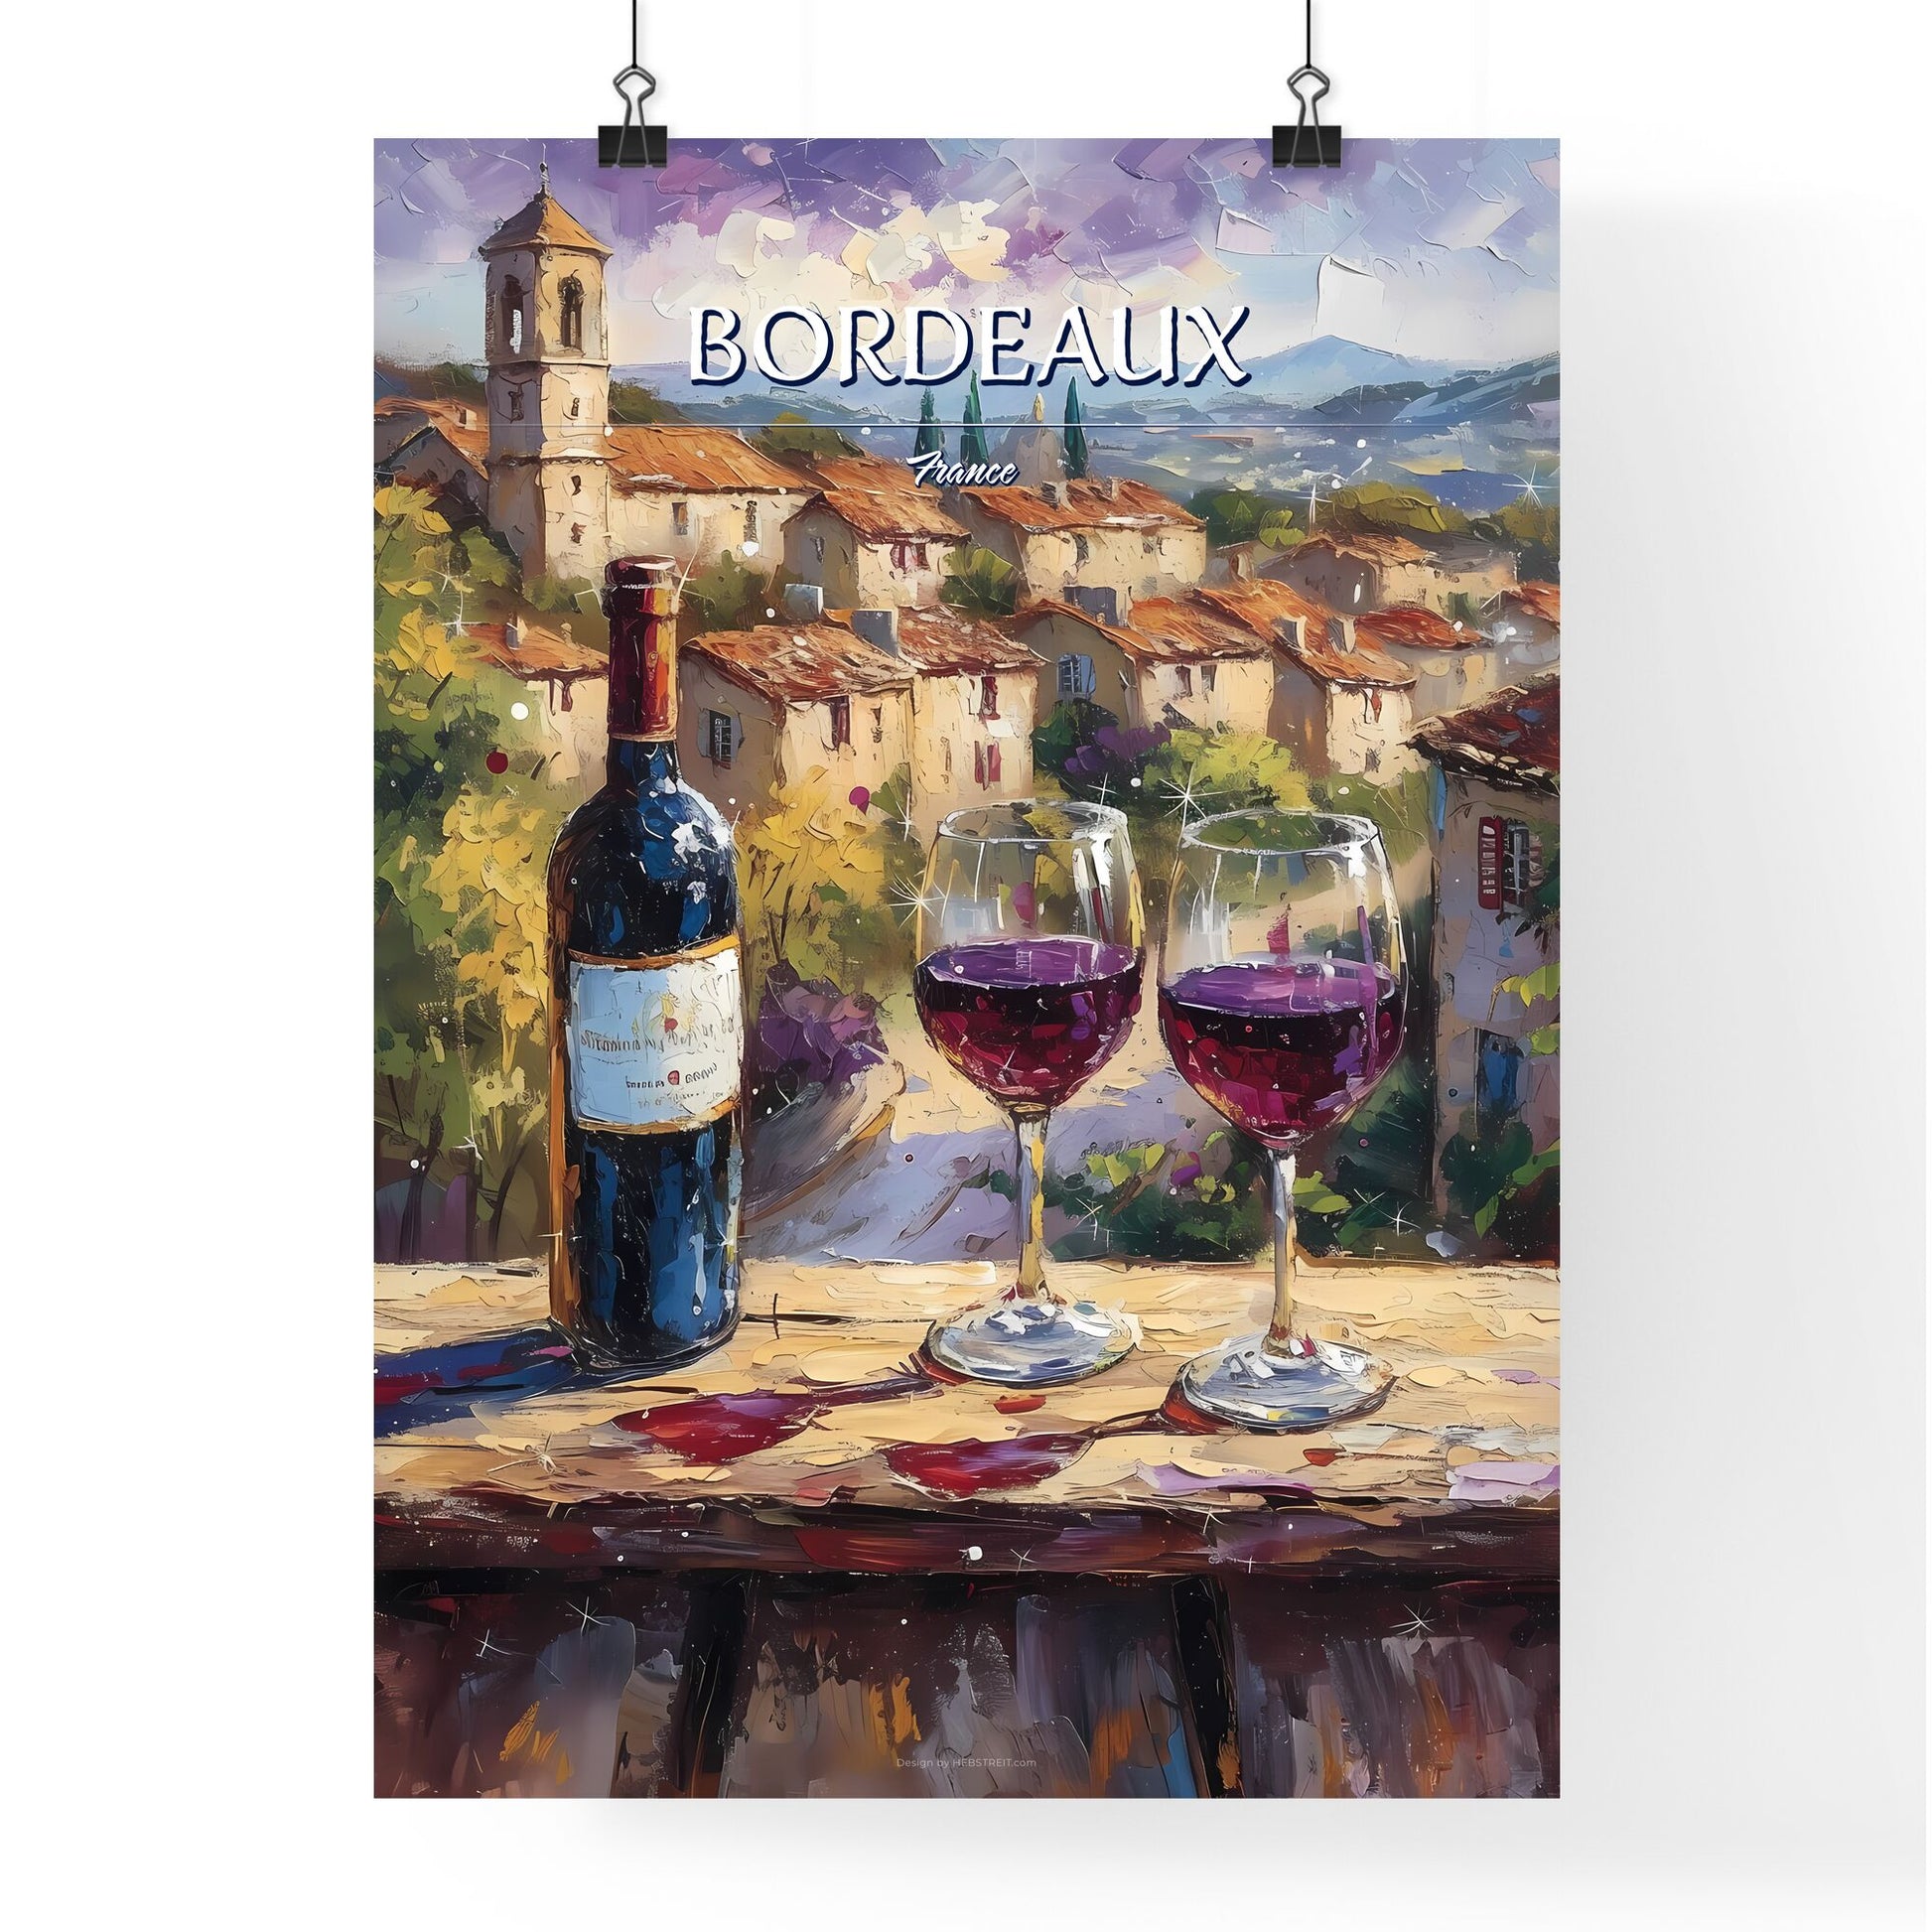 Bordeaux, France - Art print of a bottle and glasses of wine on a table Default Title